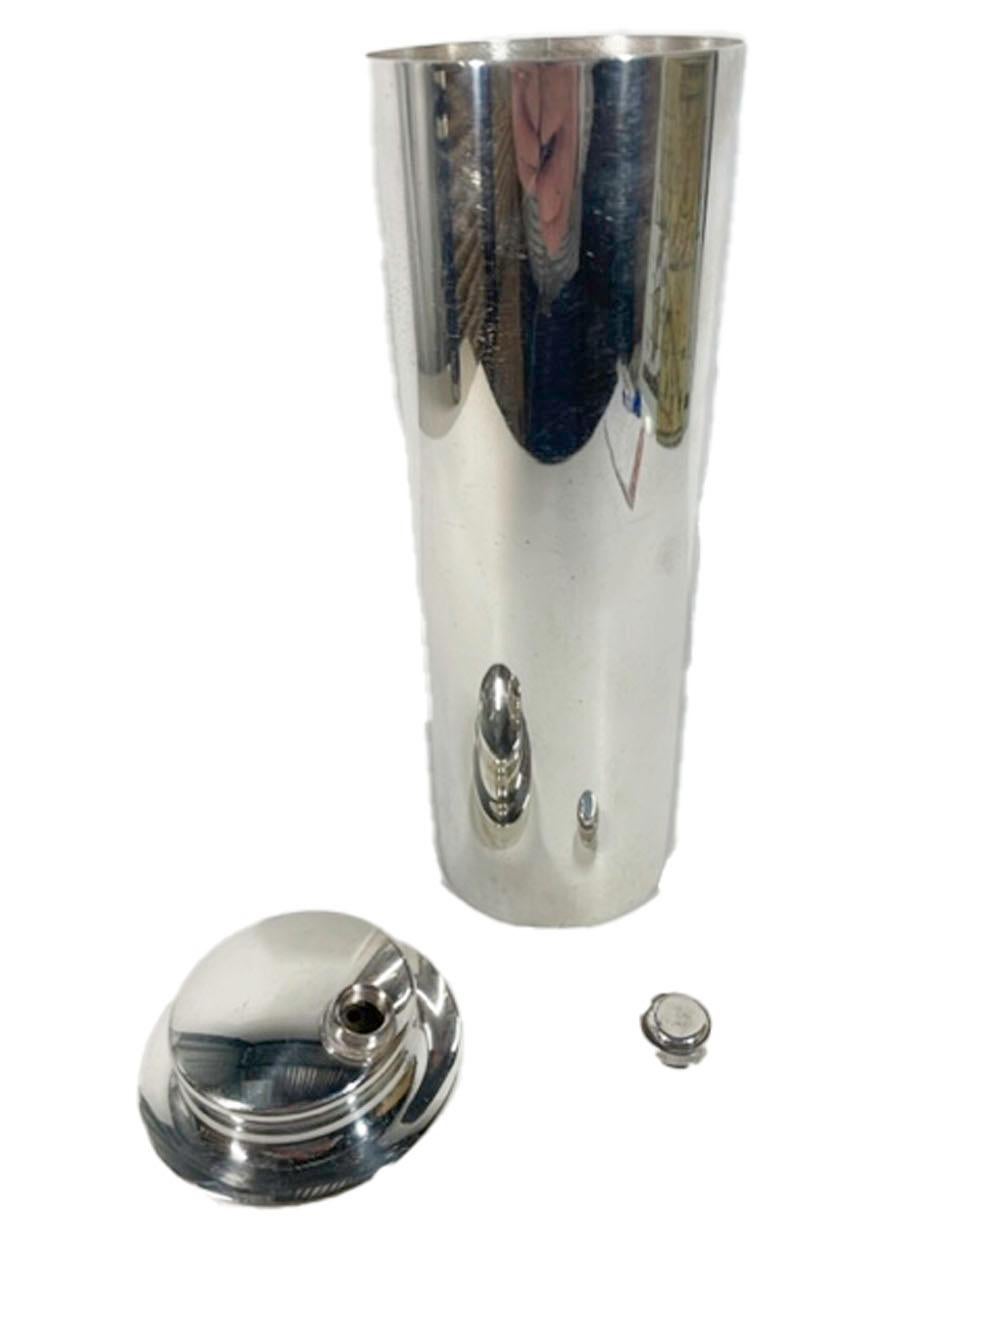 20th Century Vintage Silver Plate Skyscraper Cocktail Shaker by English Silver Mfg Corp